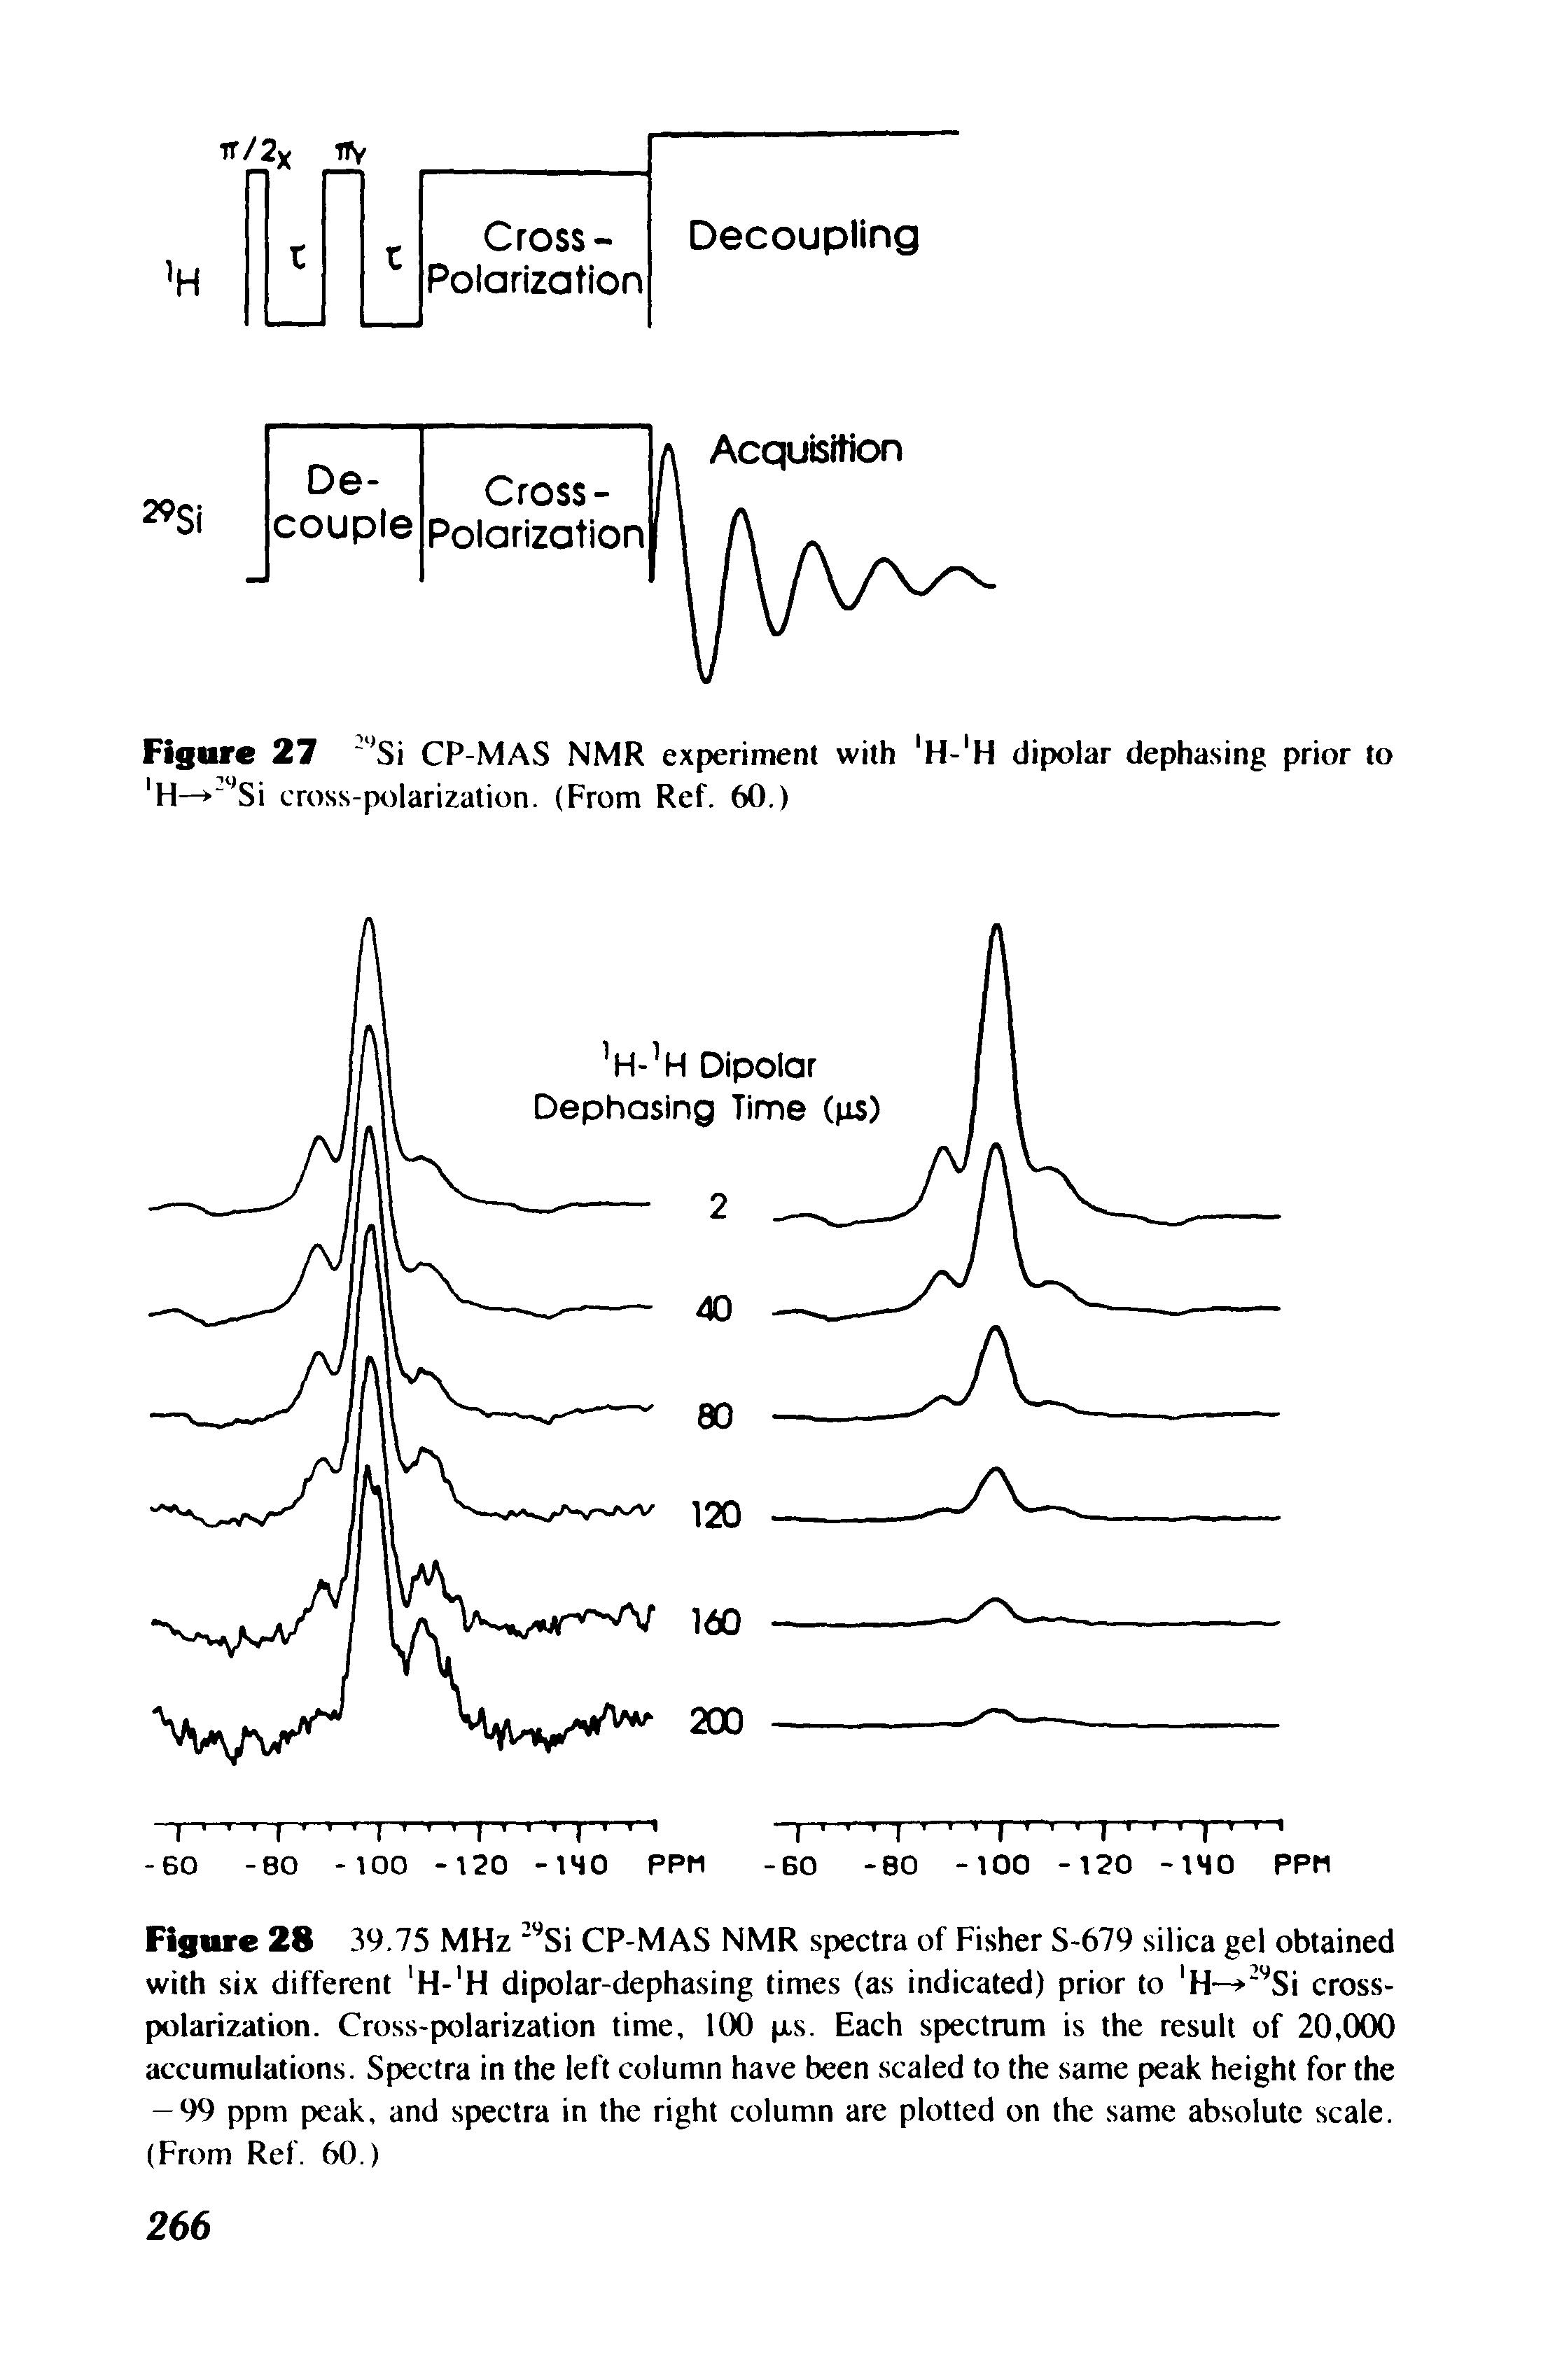 Figure 28 39.75 MHz " Si CP-MAS NMR spectra of Fisher S-679 silica gel obtained with six different H- H dipolar-dephasing times (as indicated) prior to H- " Si crosspolarization. Cross-polarization time, 100 xs. Each spectrum is the result of 20,000 accumulations. Spectra in the left column have been scaled to the same peak height for the — 99 ppm peak, and spectra in the right column are plotted on the same absolute scale. (From Ref. 60.)...